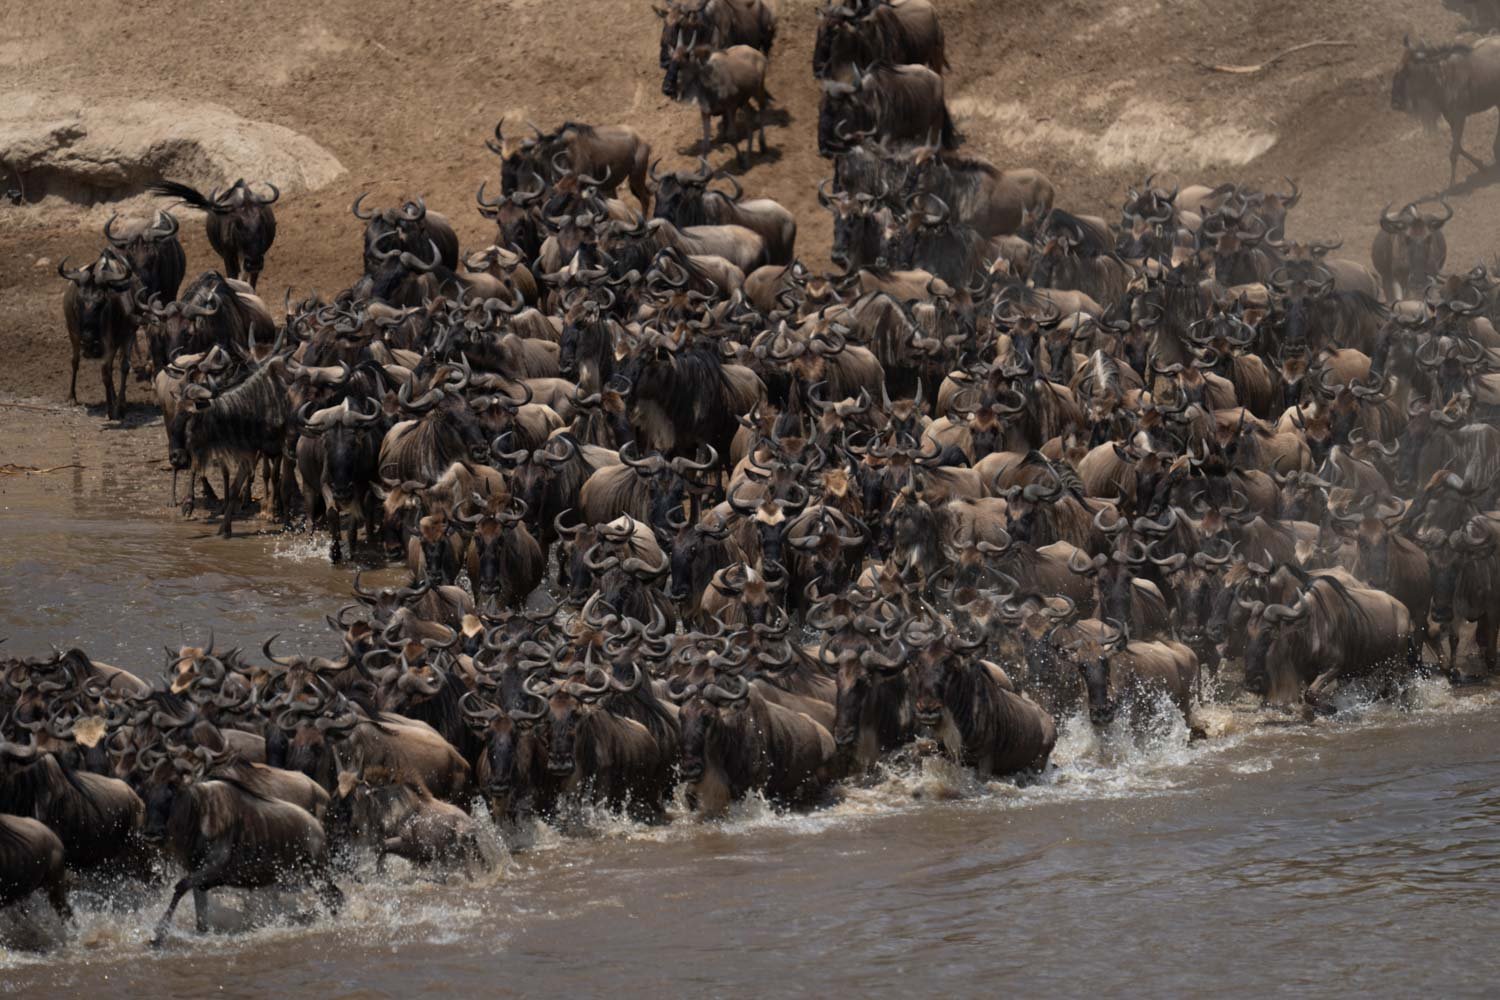 Confusion of blue wildebeest cross shallow river